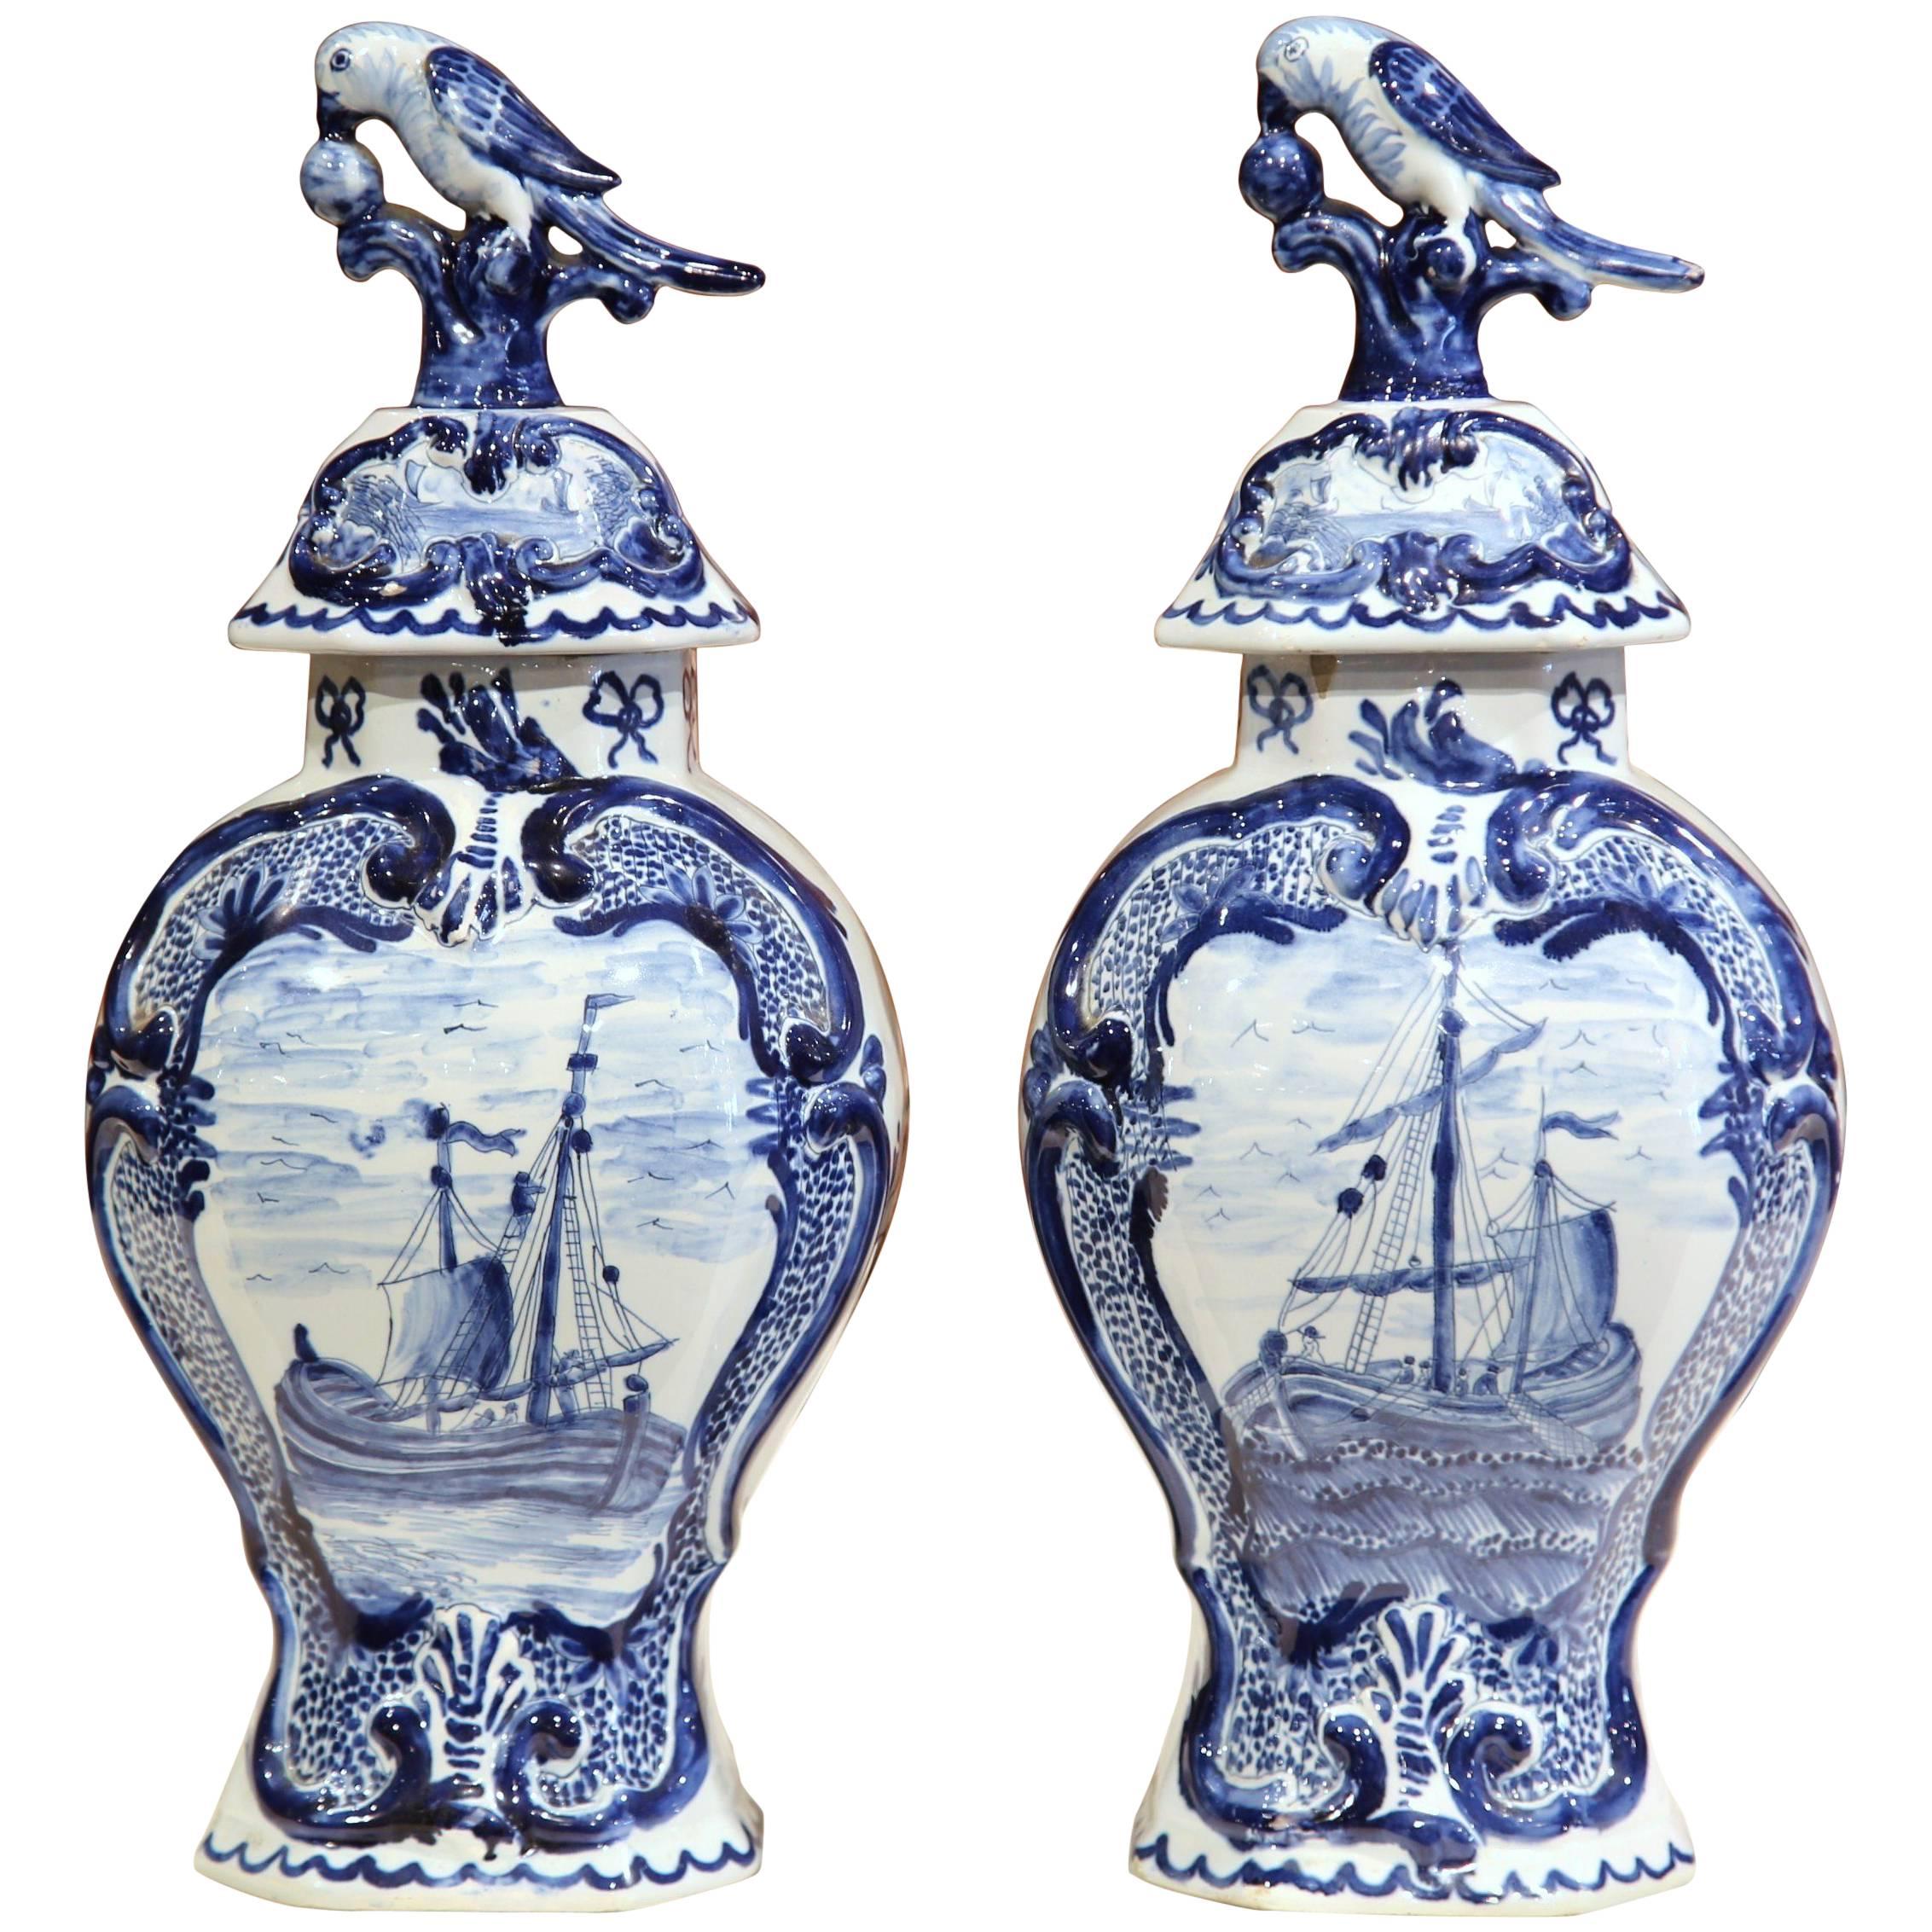 Pair of Early 20th Century Blue and White Porcelain Delft Vases with Lids